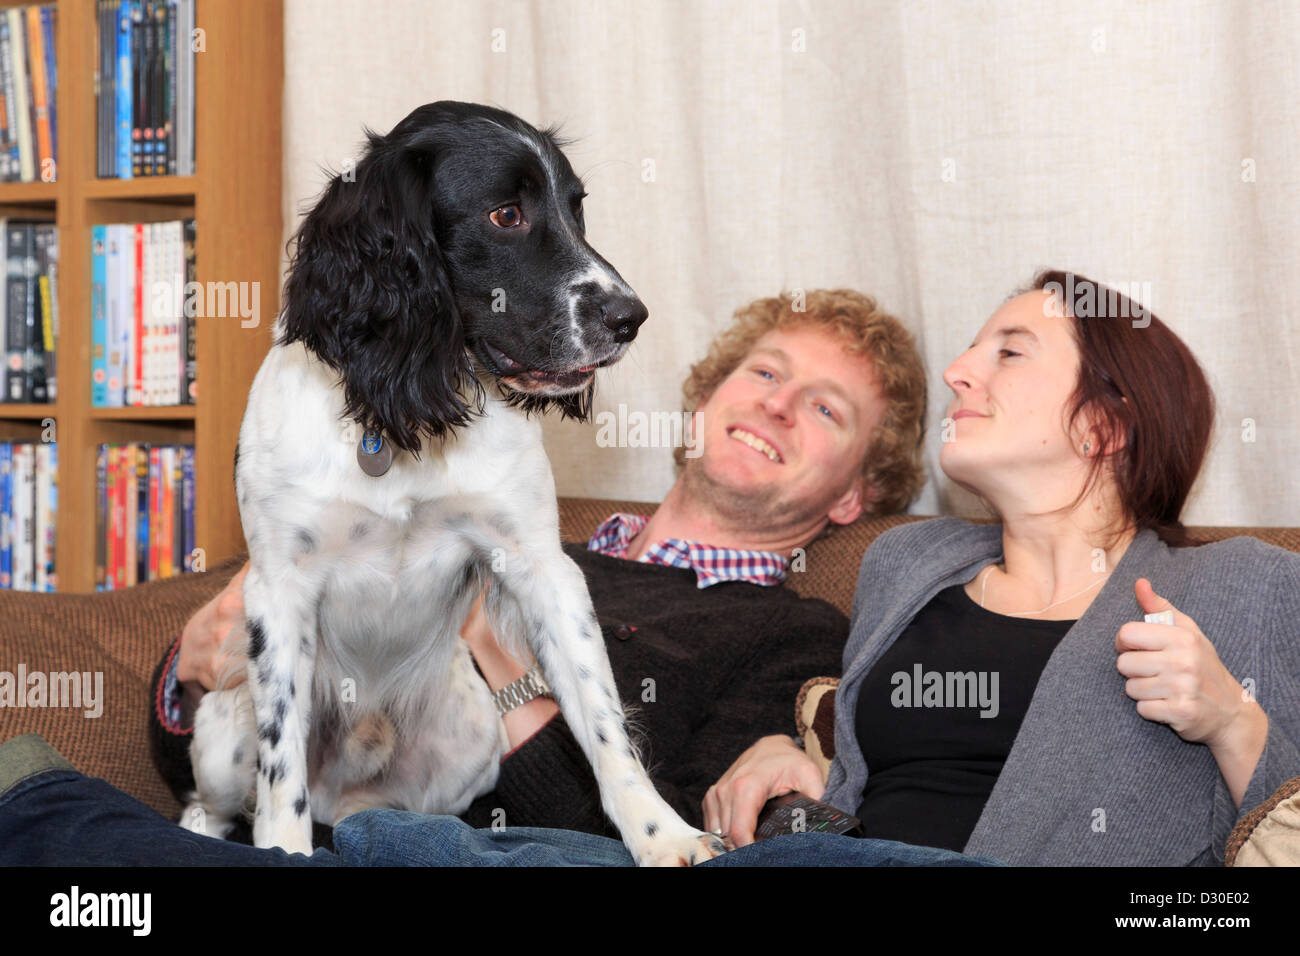 Everyday scene of two people sitting on a sofa smiling at an English Springer Spaniel pet dog sat on their lap in a living room at home England UK Stock Photo